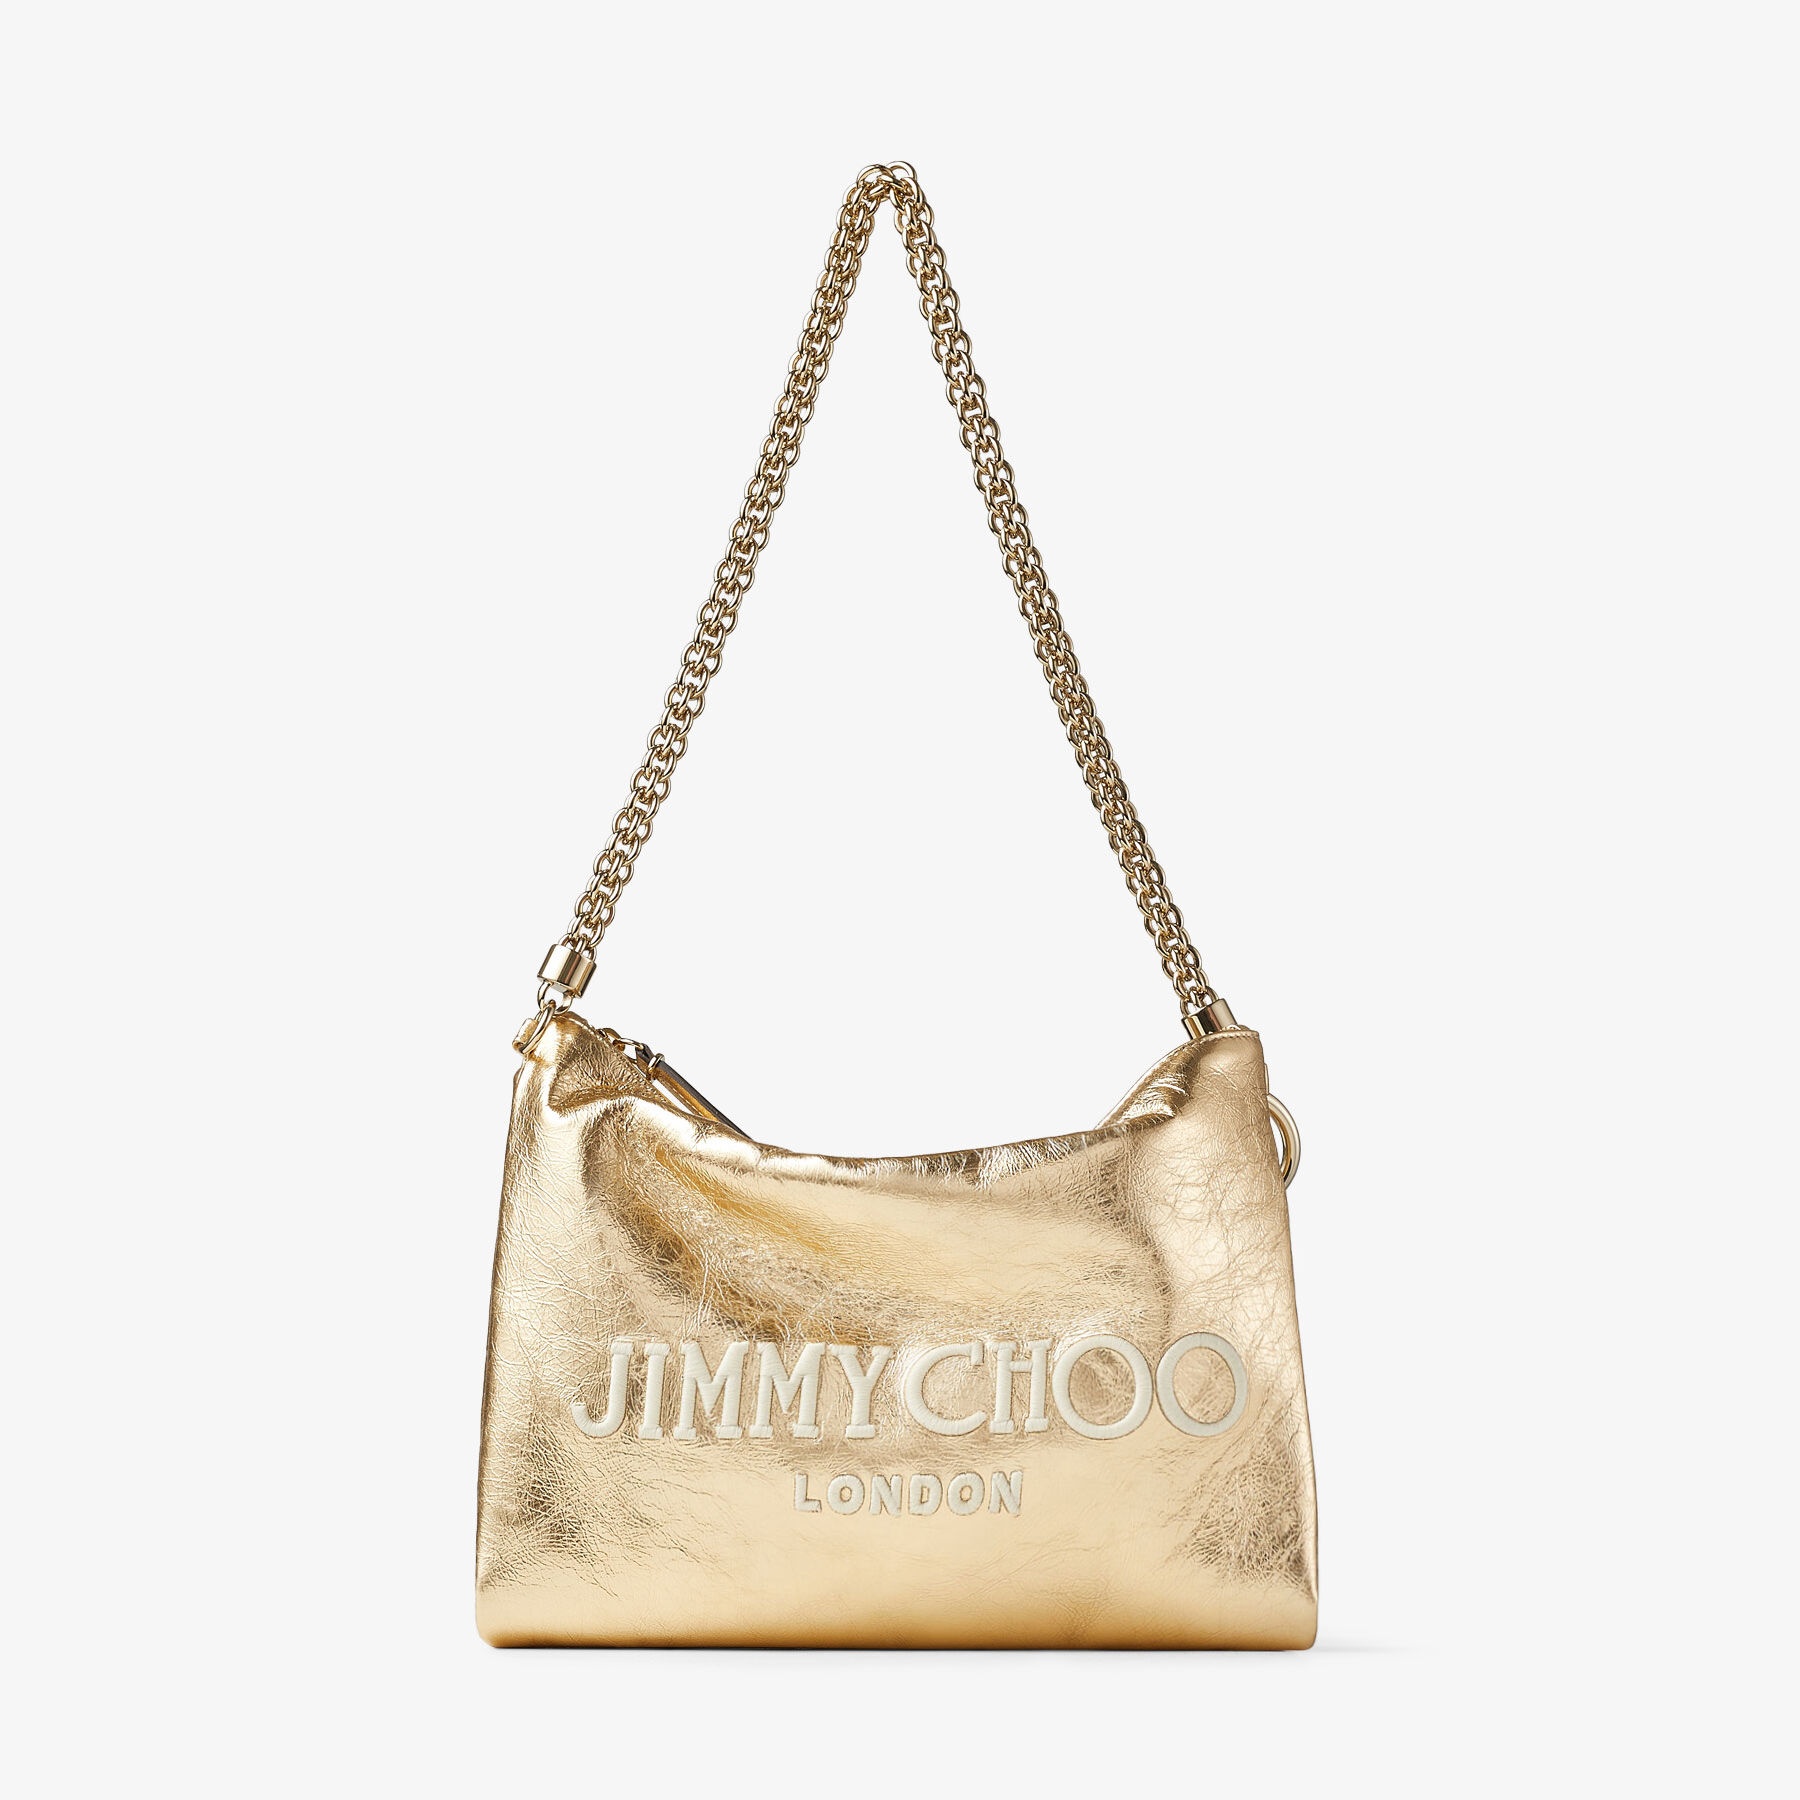 Callie Shoulder
Gold Metallic Nappa Shoulder Bag with Jimmy Choo Embroidery - 1